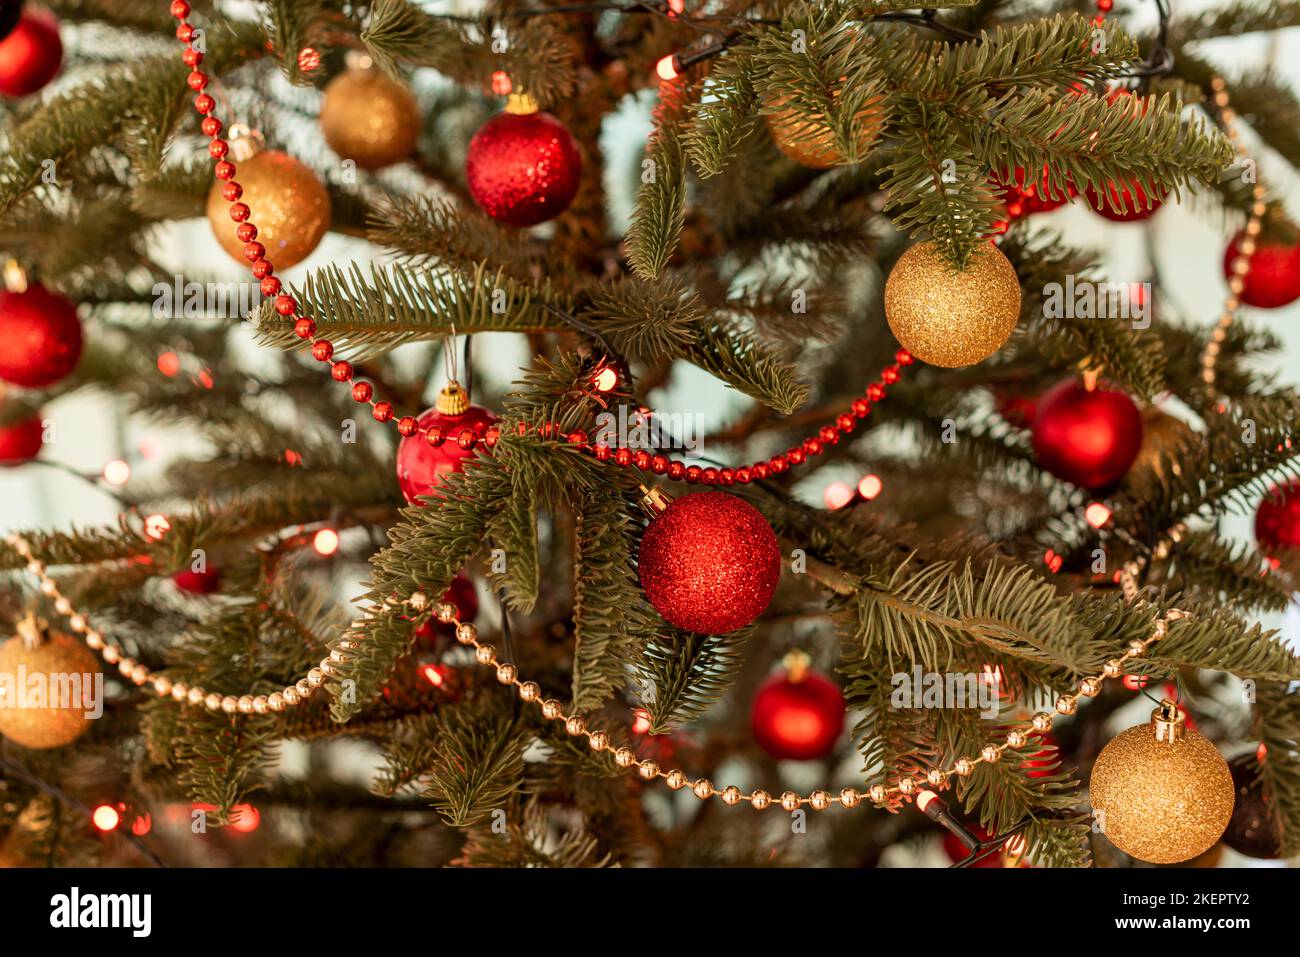 Part of a Christmas tree decorated with lights and red and gold balls Stock Photo